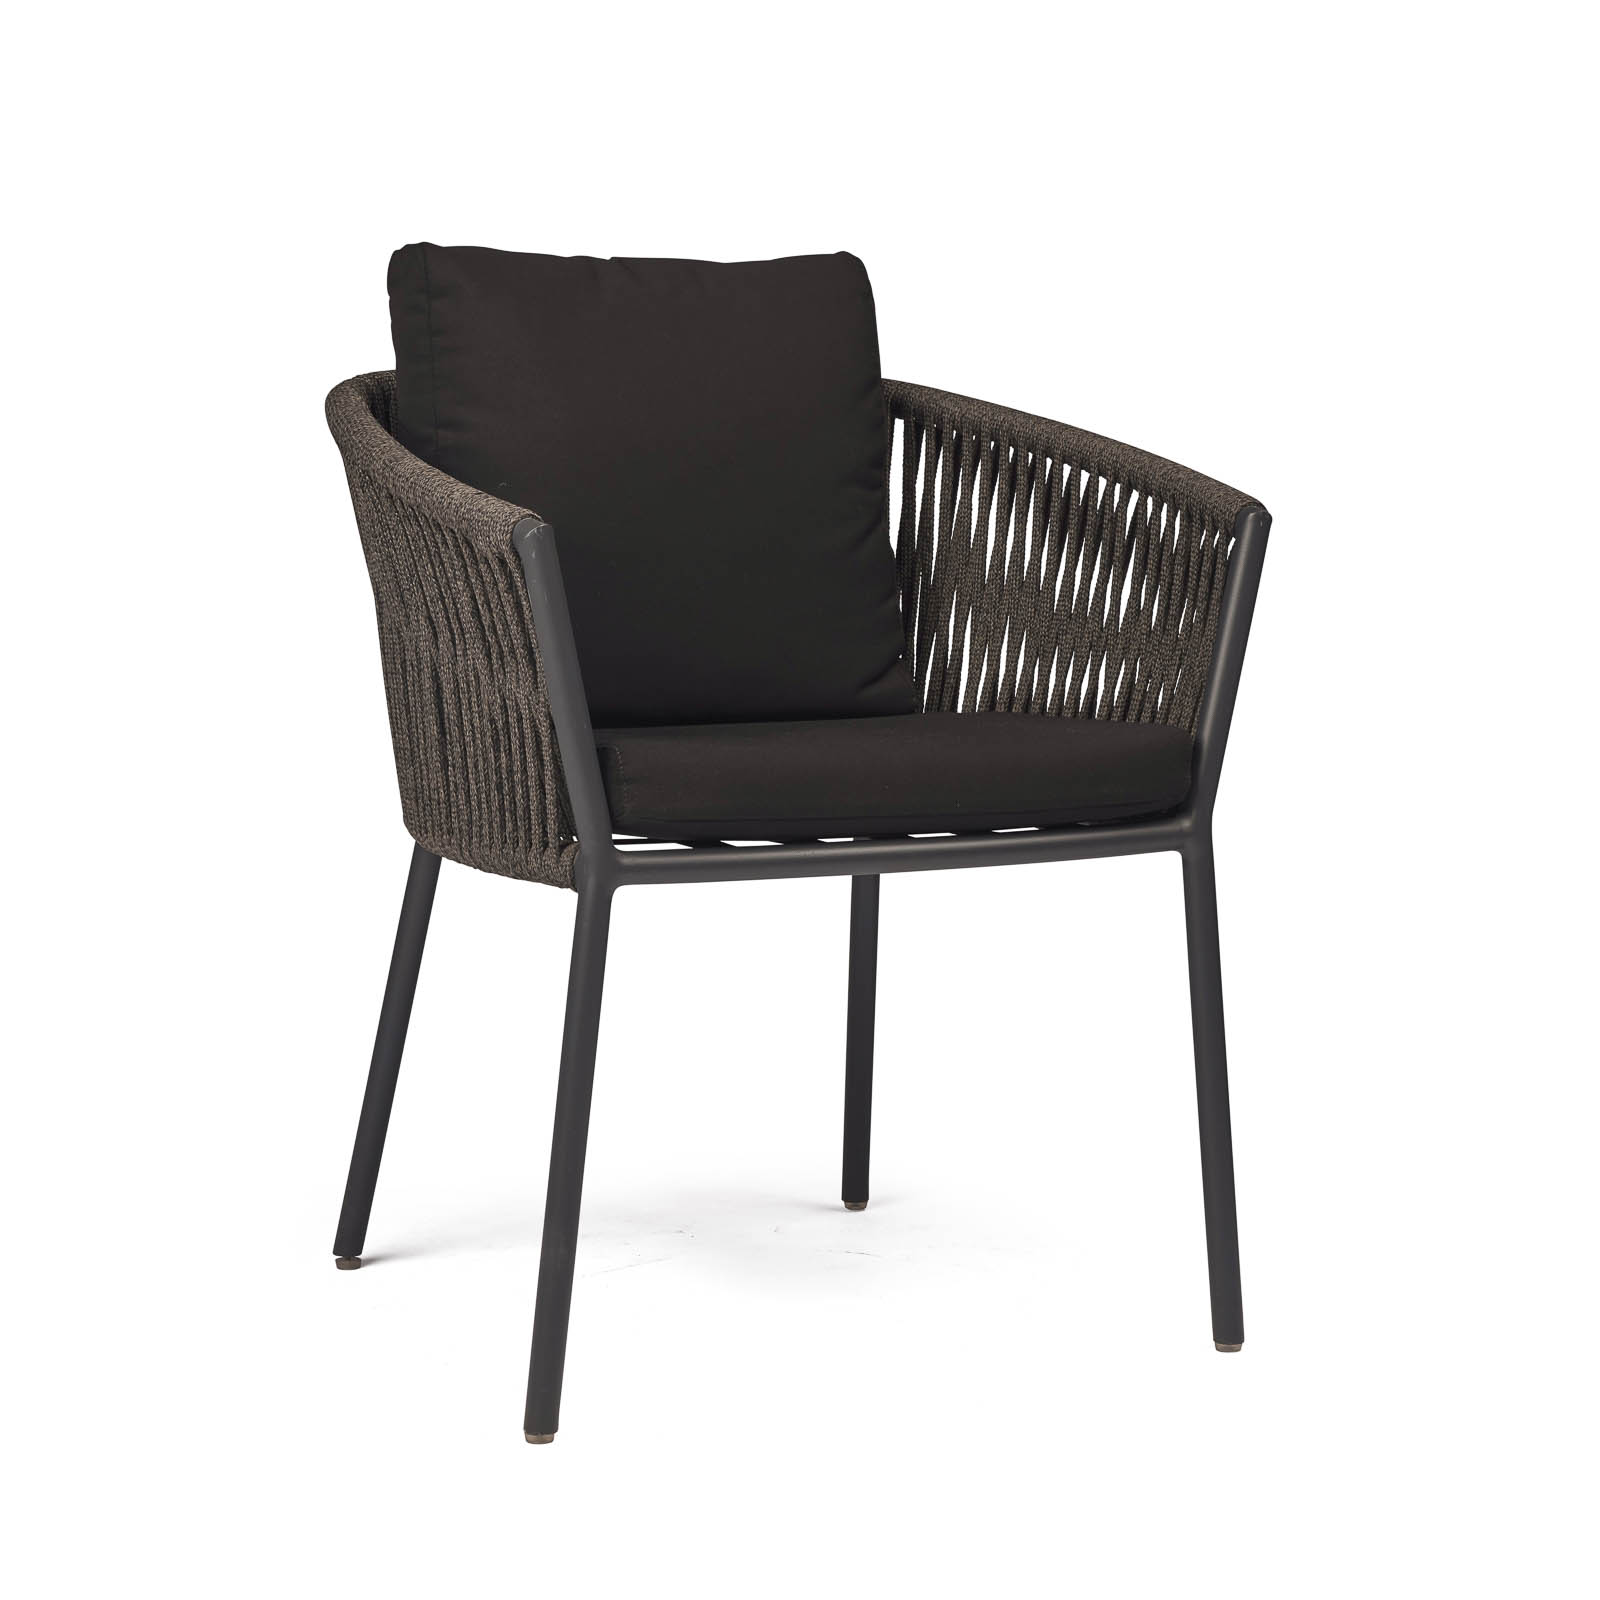 Washington Rope Outdoor Dining Chair (Coal)